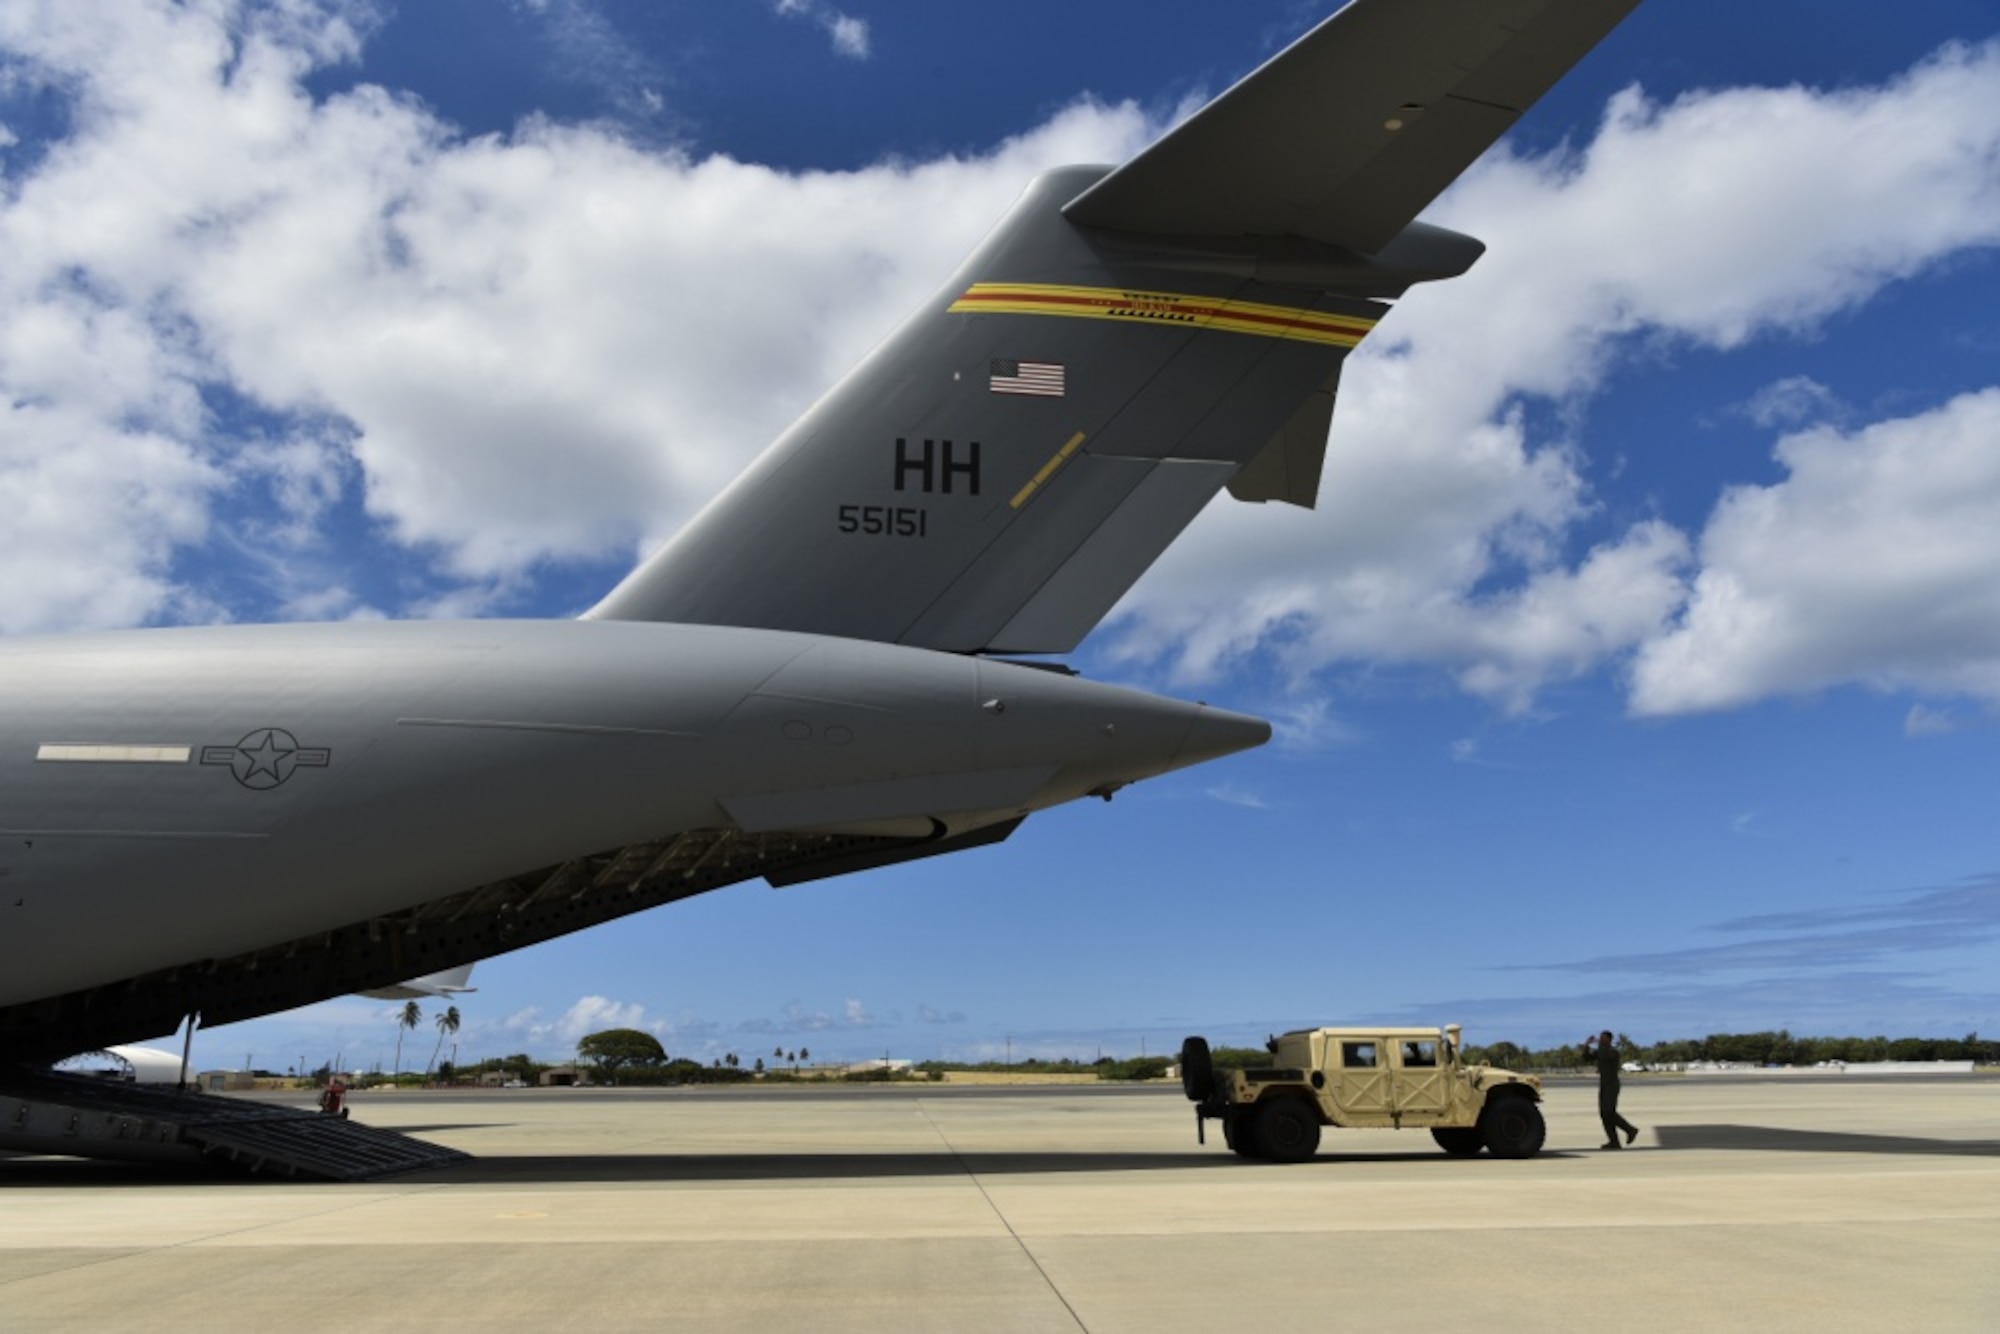 U.S. Air Force Airman 1st Class Julian Pilgrim, 535th Airlift Squadron loadmaster, spots a 25th Air Support Operations Squadron Tactical Air Control Party Humvee onto a C-17 Globemaster III on the flight line at Joint Base Pearl Harbor-Hickam, Hawaii, June 23, 2020.